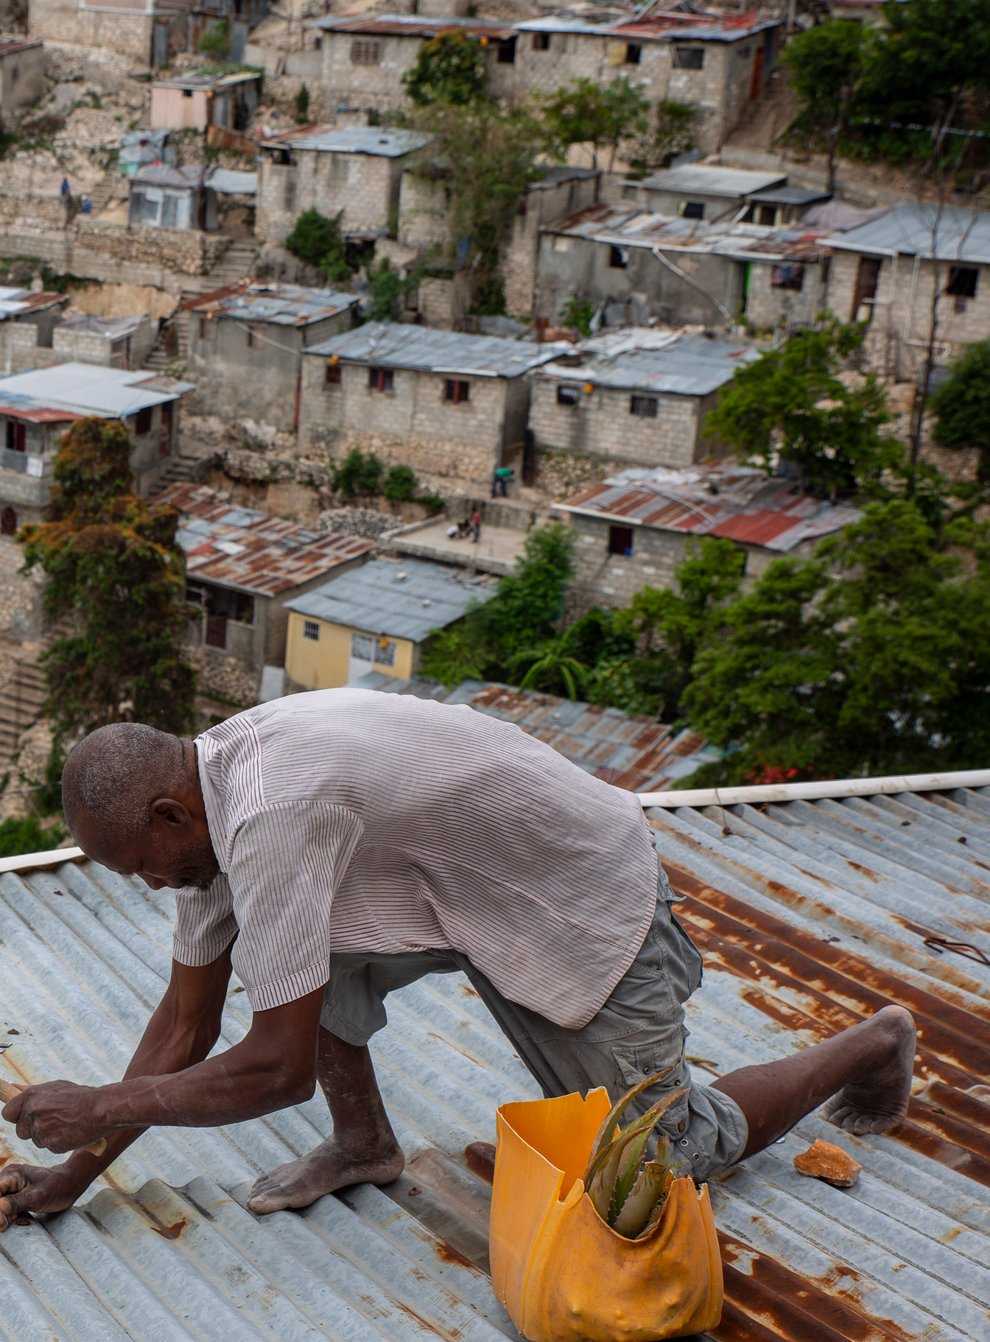 Antony Exilien secures the roof of his house in response to Tropical Storm Elsa in Port-au-Prince, Haiti